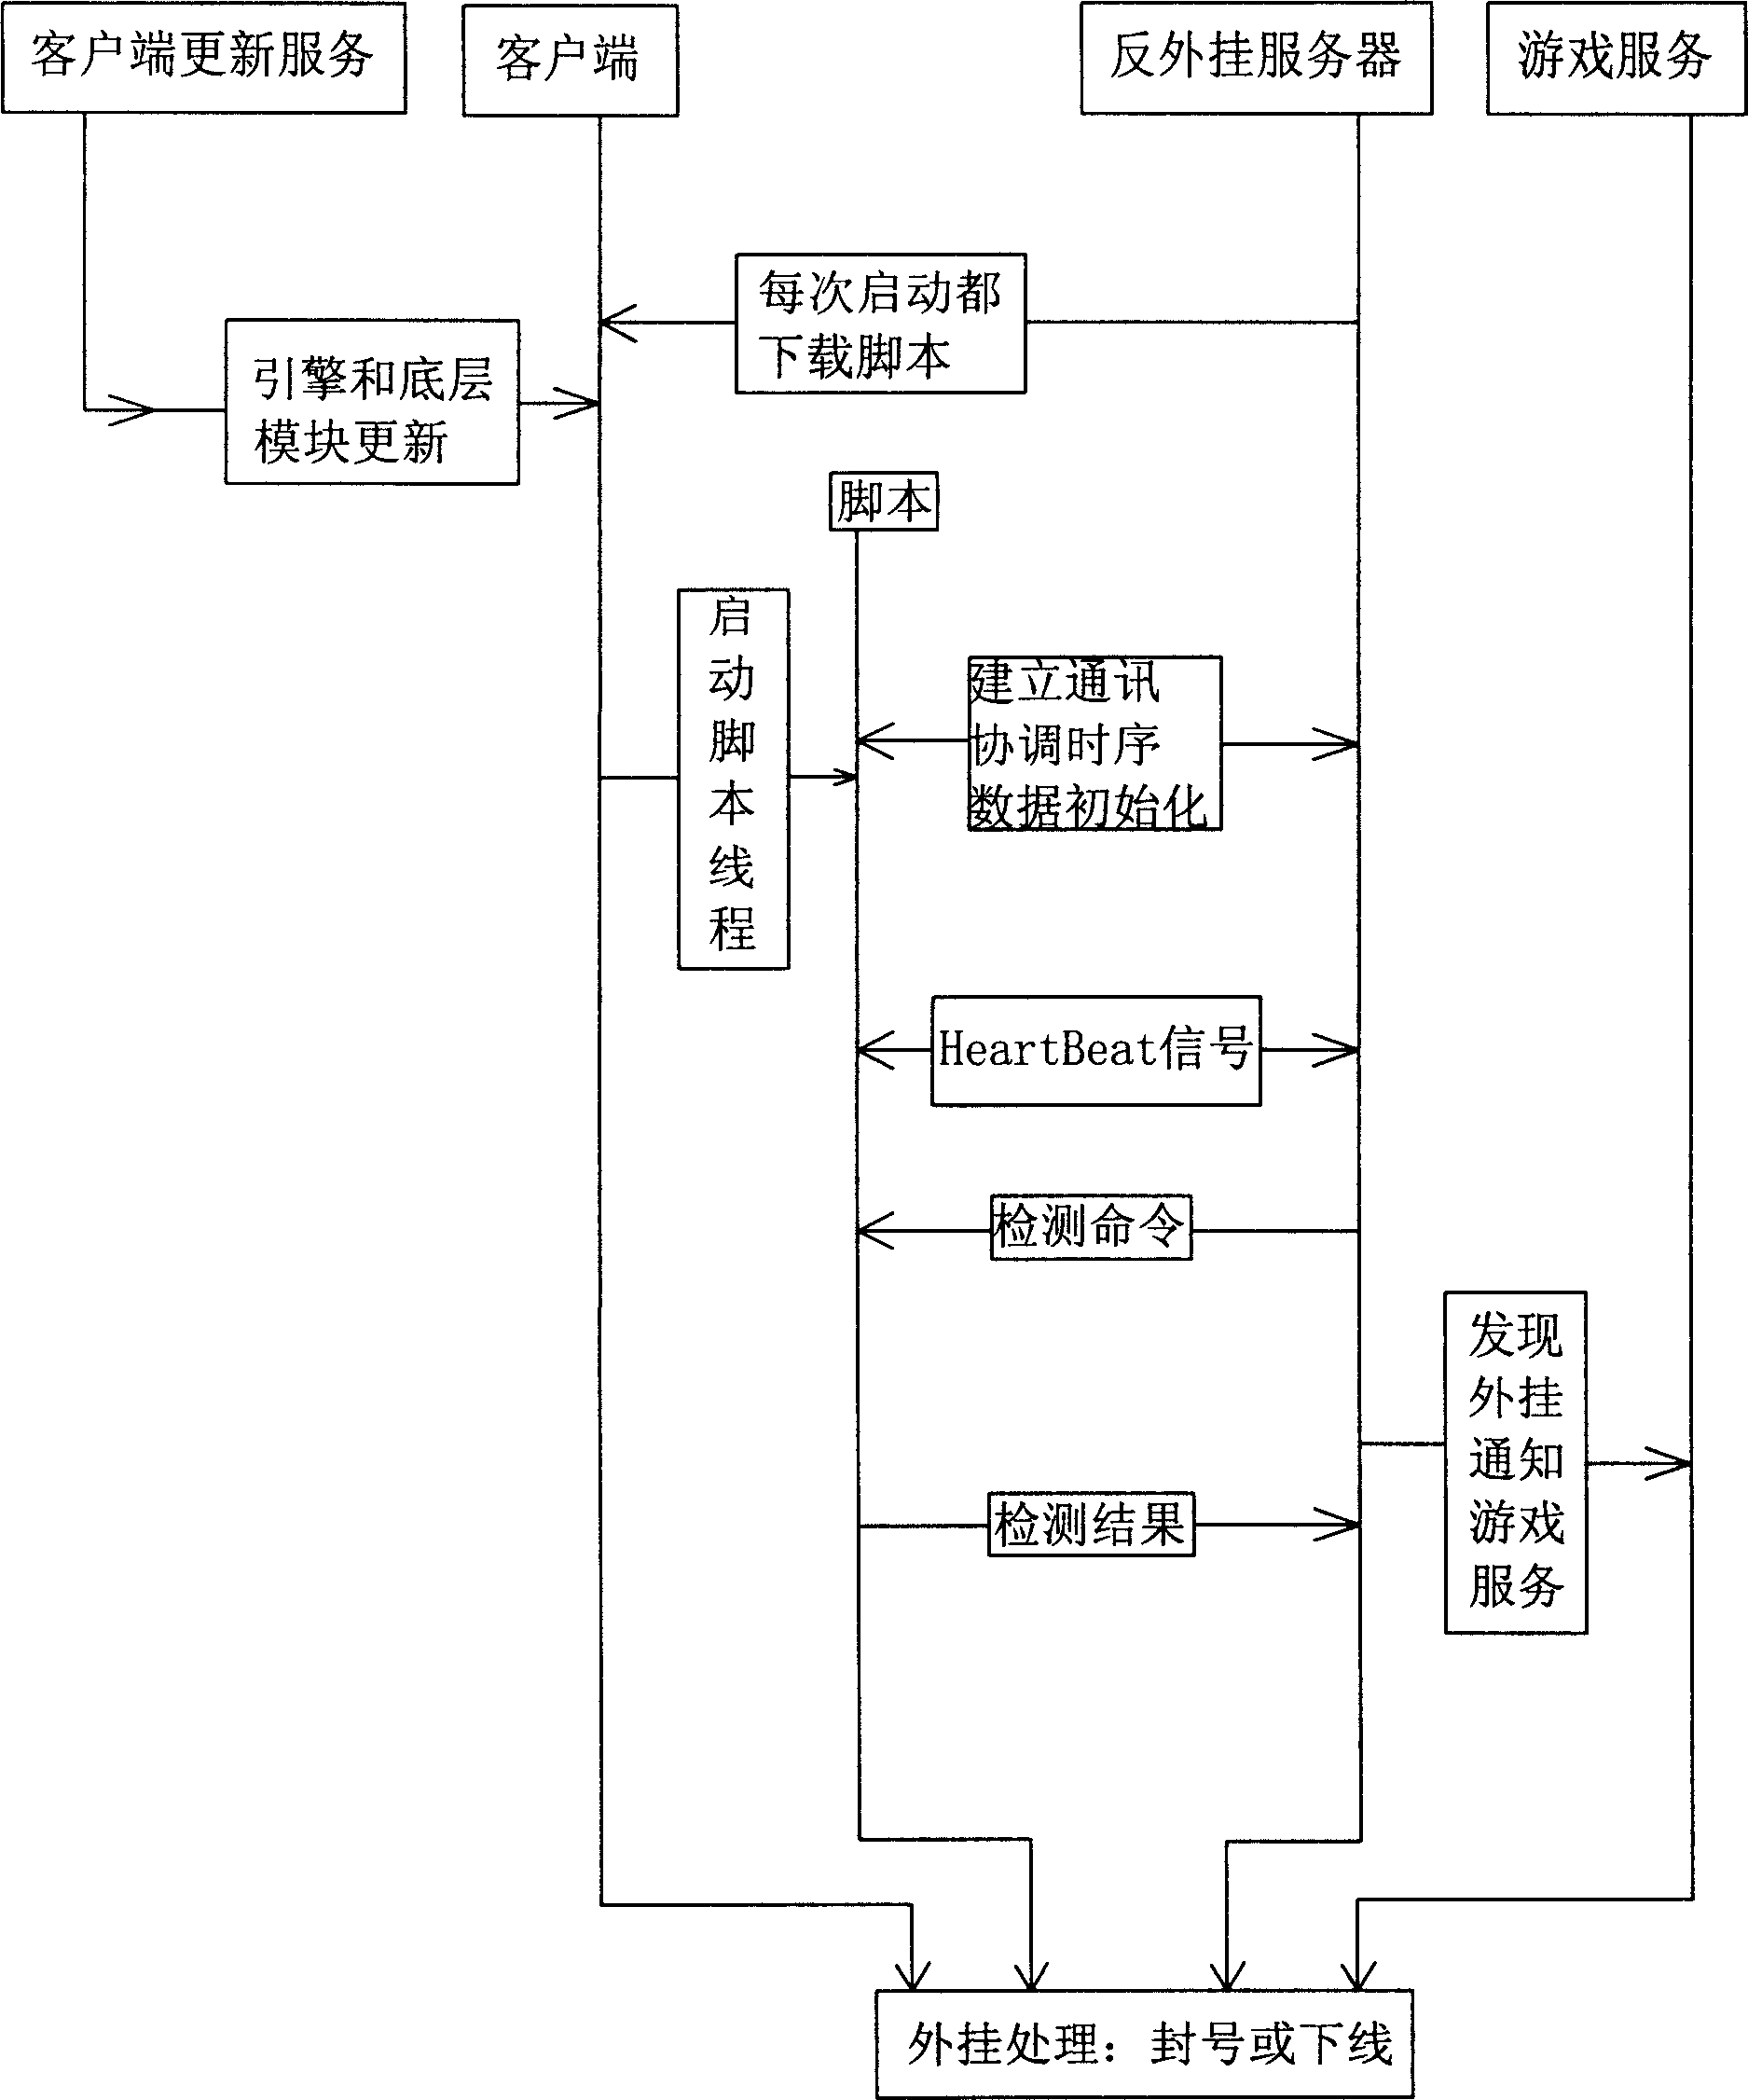 Method for preventing network gam from being external